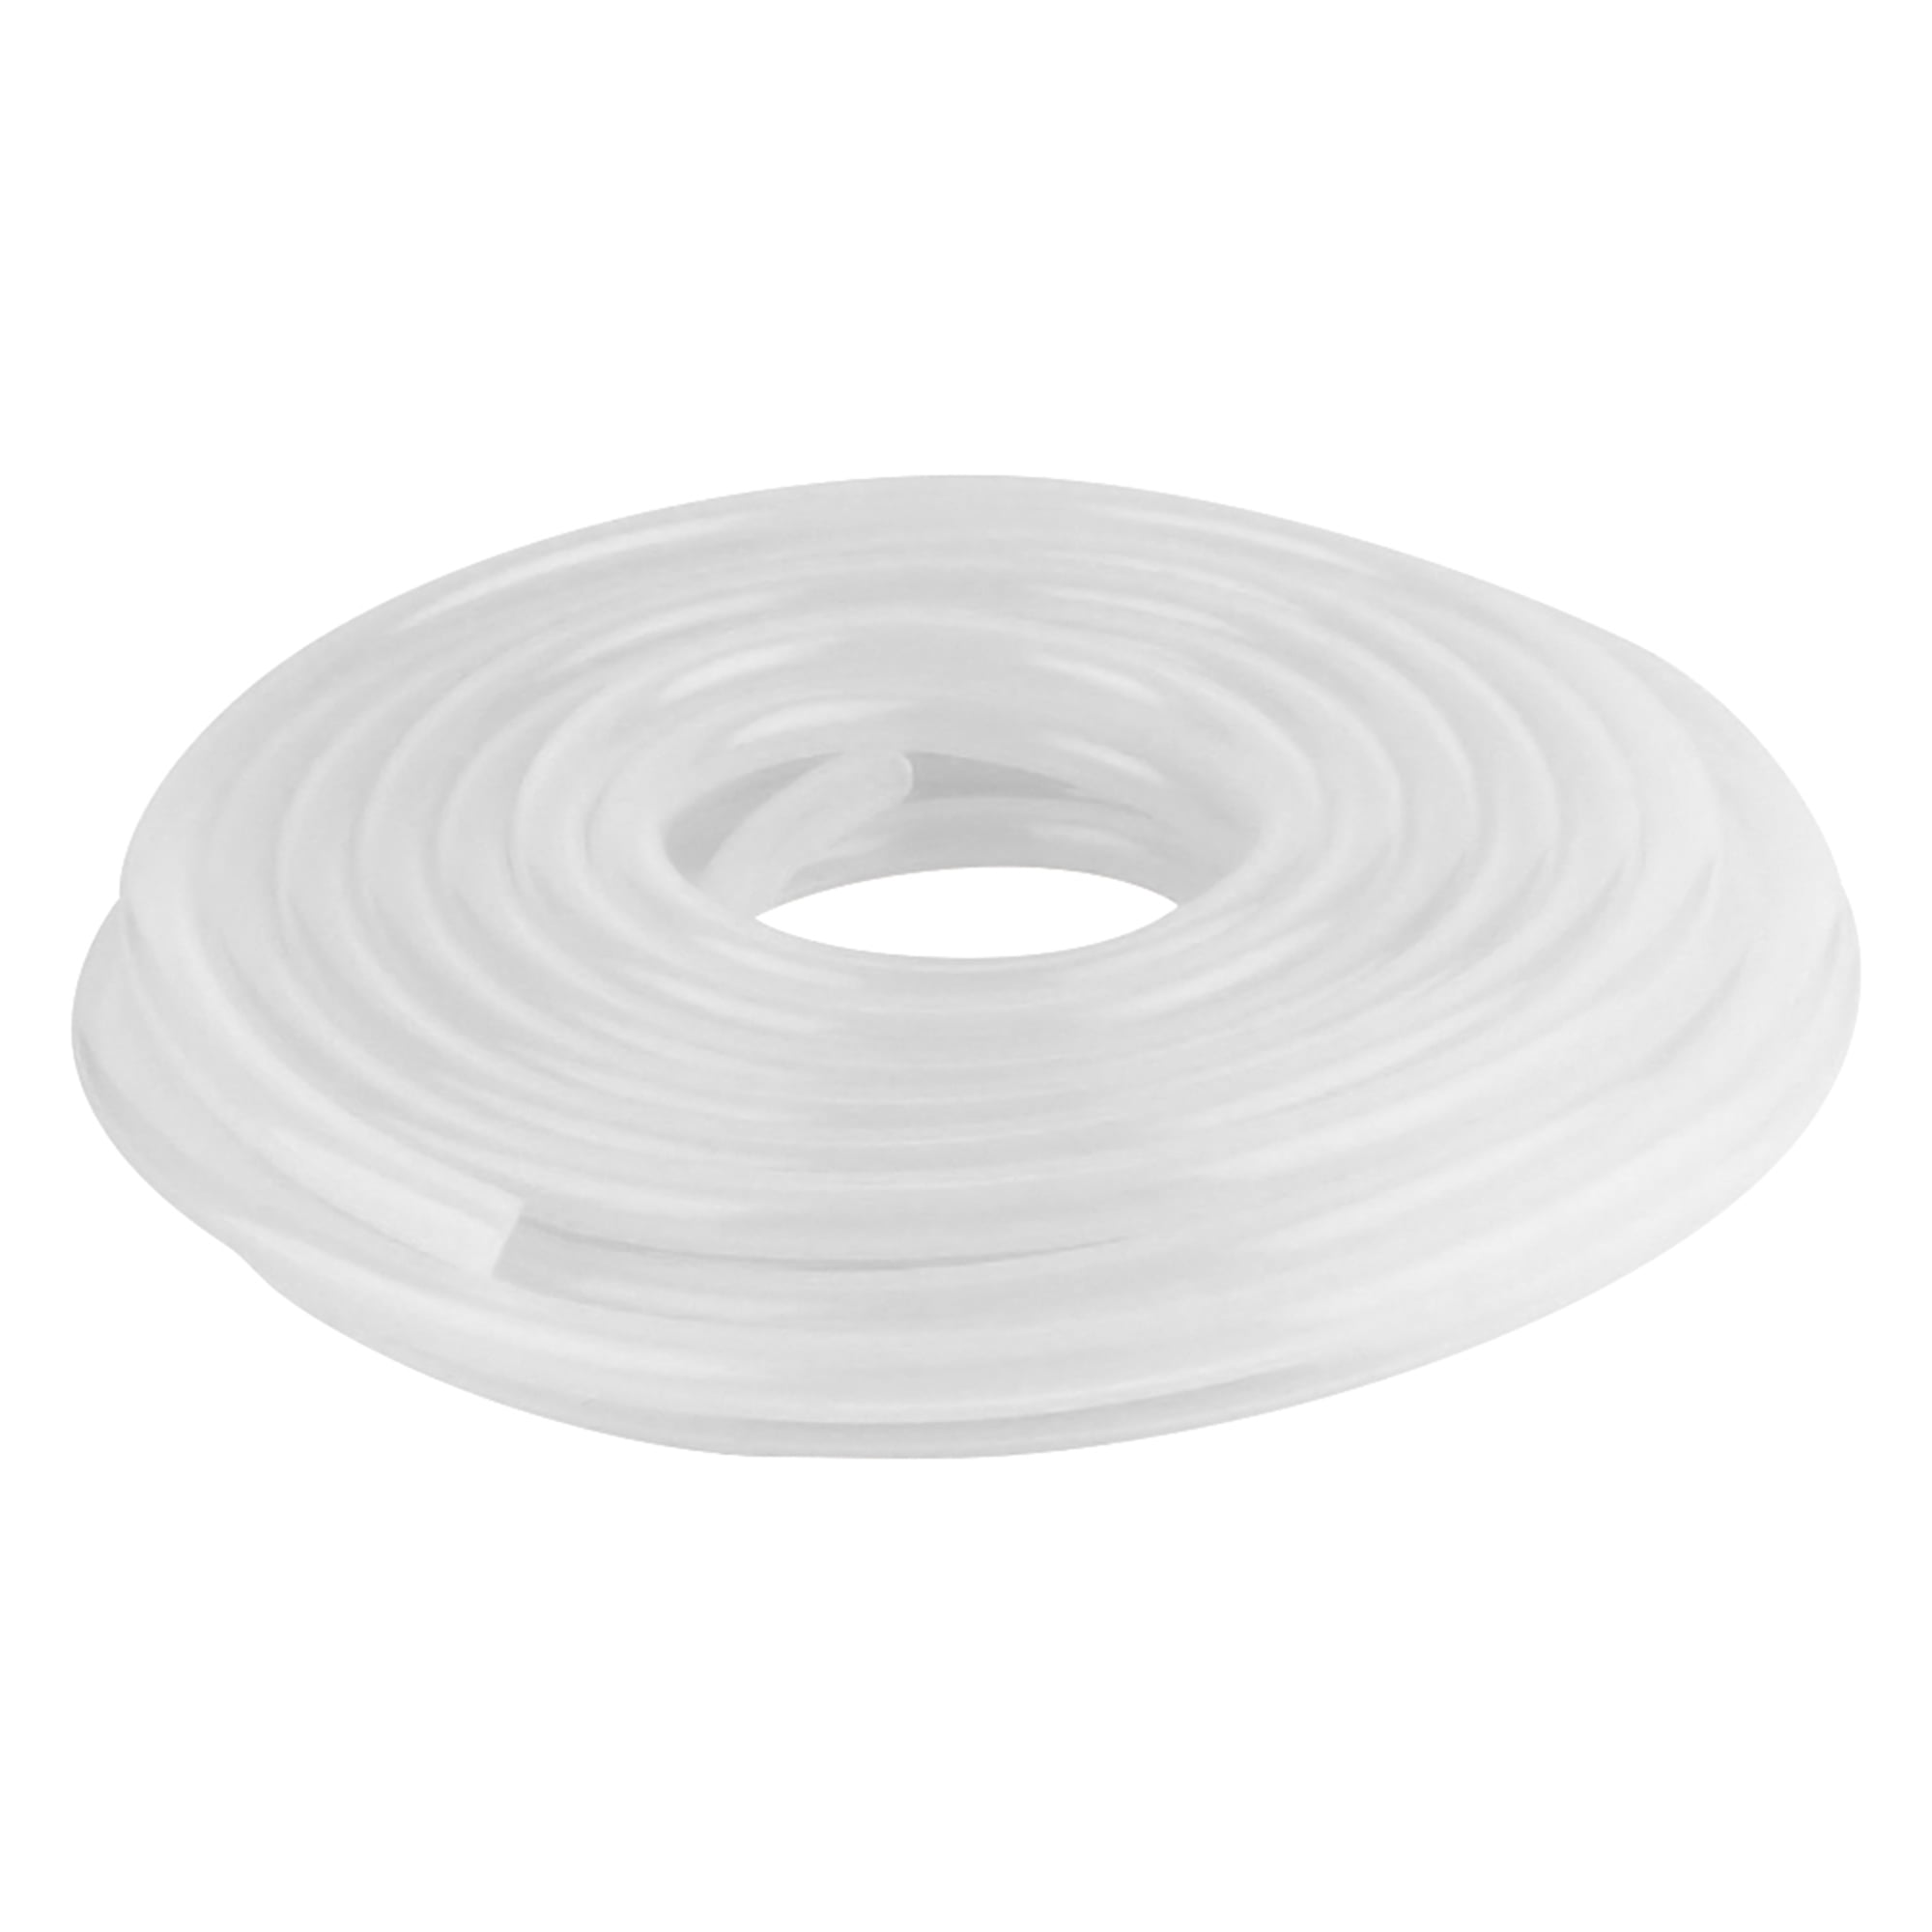 1/32" Wall Details about   White SiliconeTubing 1/4"OD 3/16"ID 10' Length 